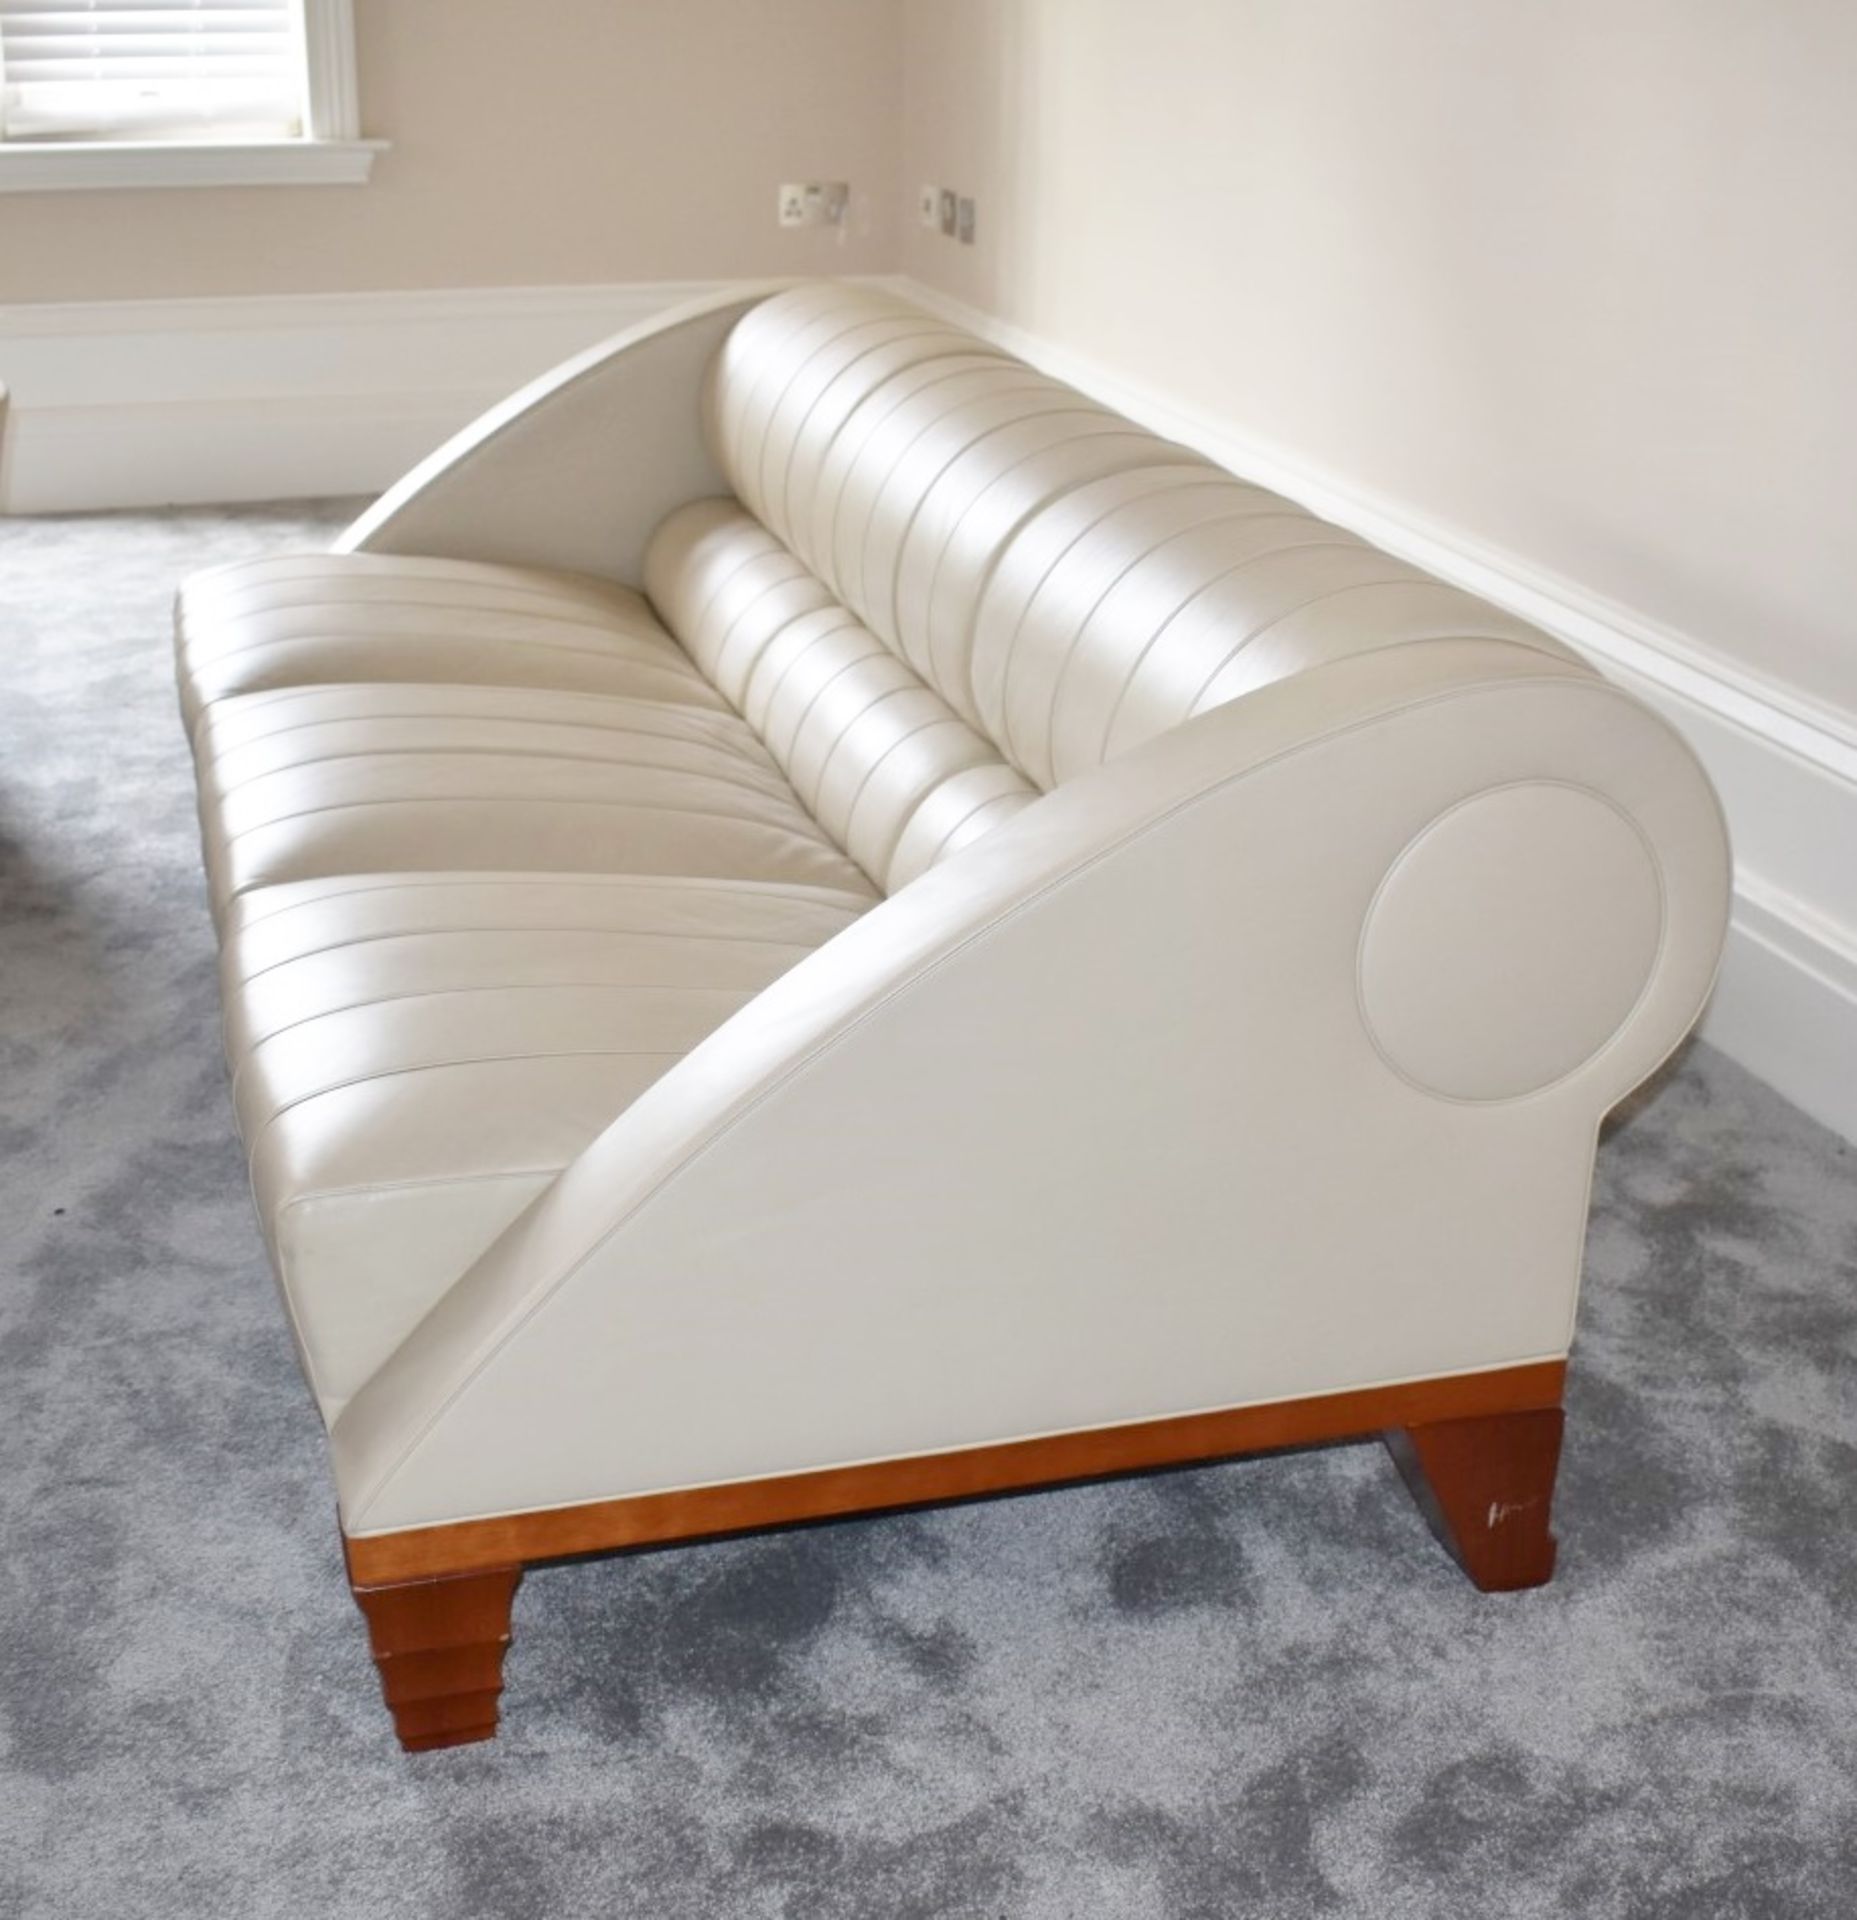 1 x Giorgetti Aries Three Seater Leather Sofa - Designed by Leon Krier - Contemporary Sofa - Image 7 of 10